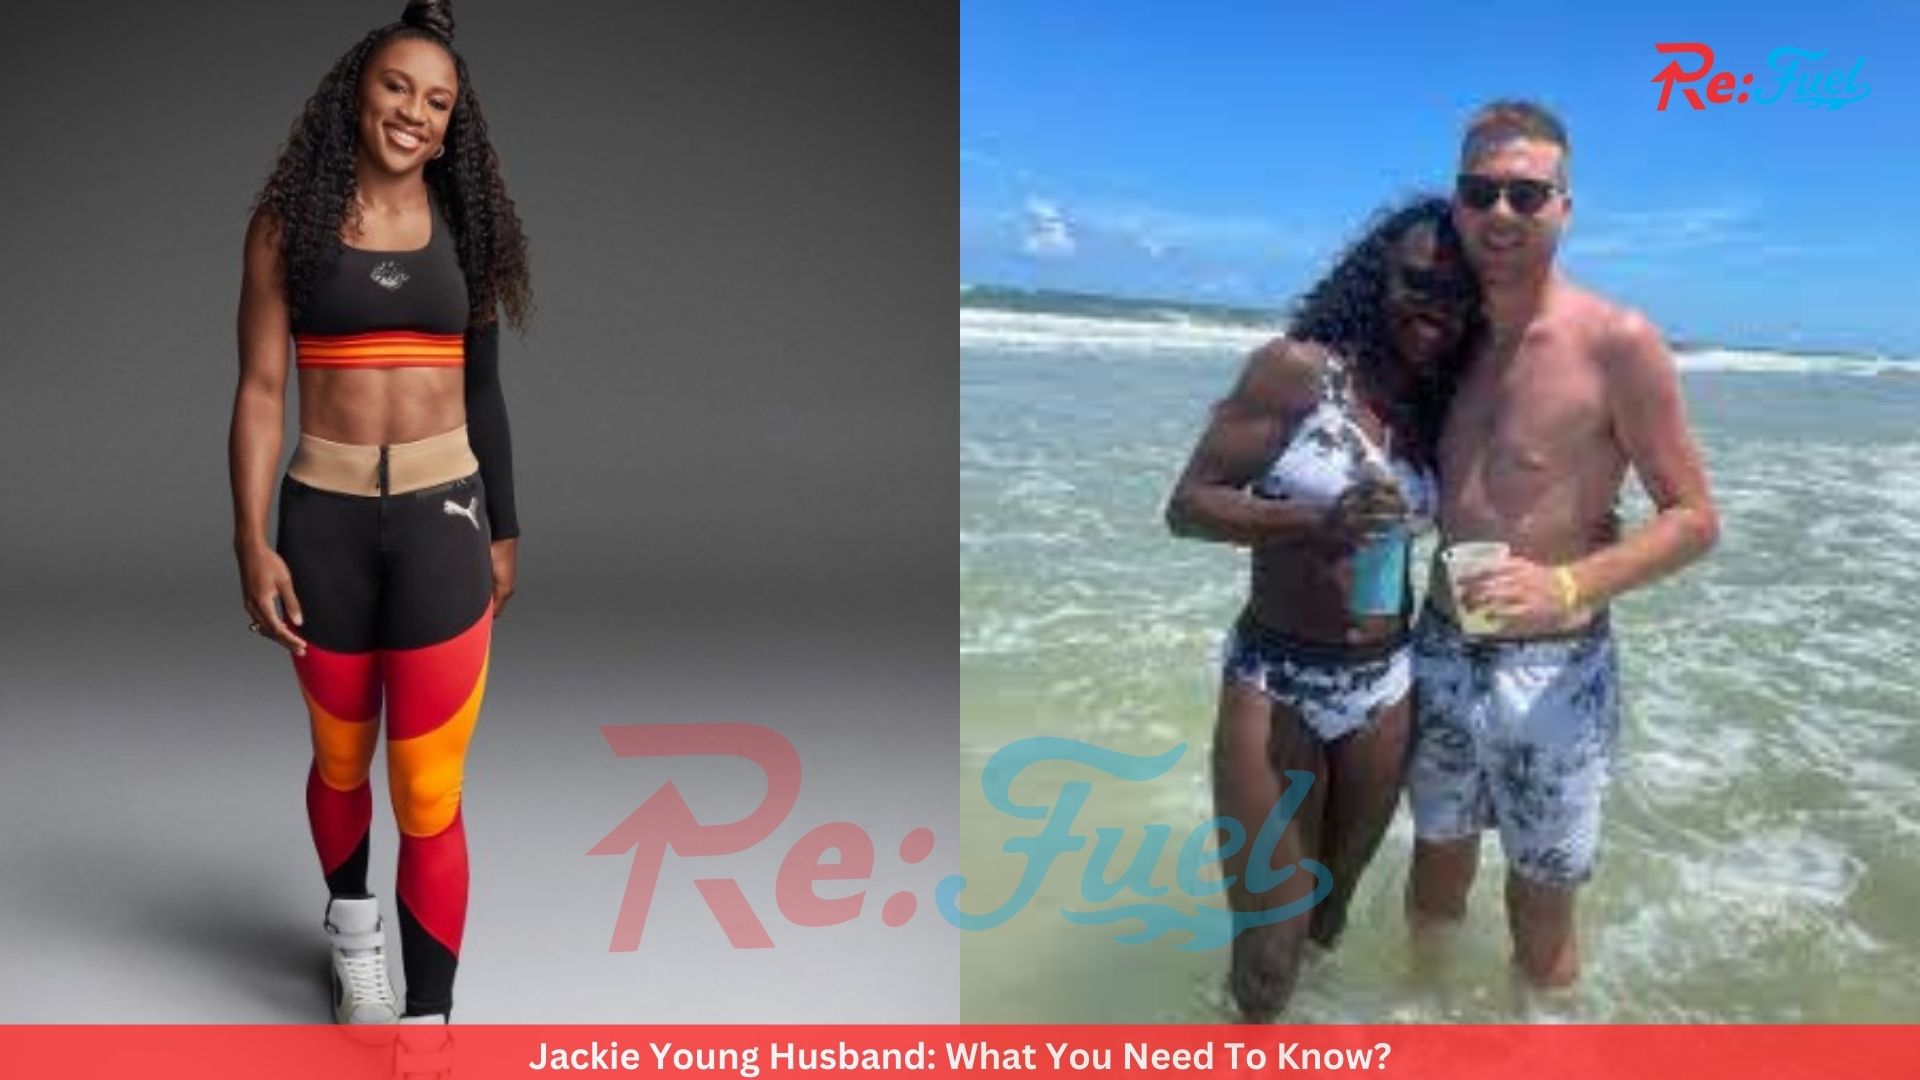 Jackie Young Husband: What You Need To Know?